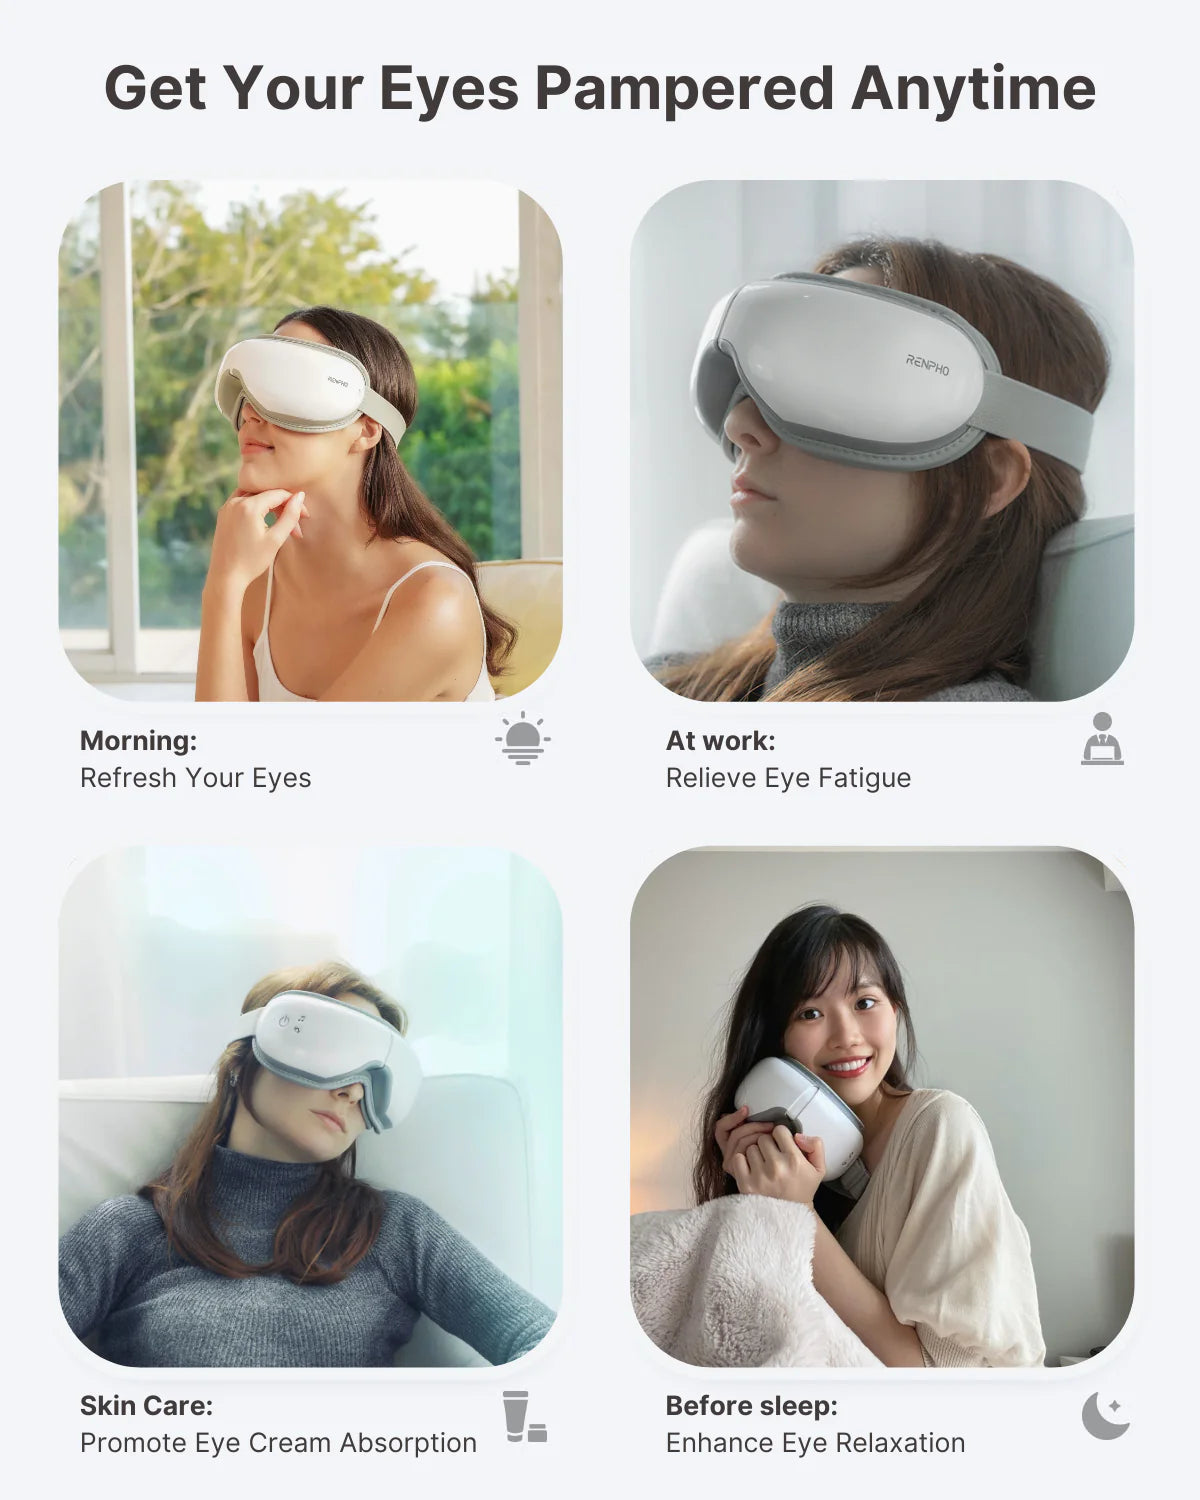 Four-panel image showcasing individuals using a Renpho EU Eyeris 1 Eye Massager in different settings: a woman by a sunny window, a woman at a desk, another wearing a scarf, and a smiling woman holding a phone.